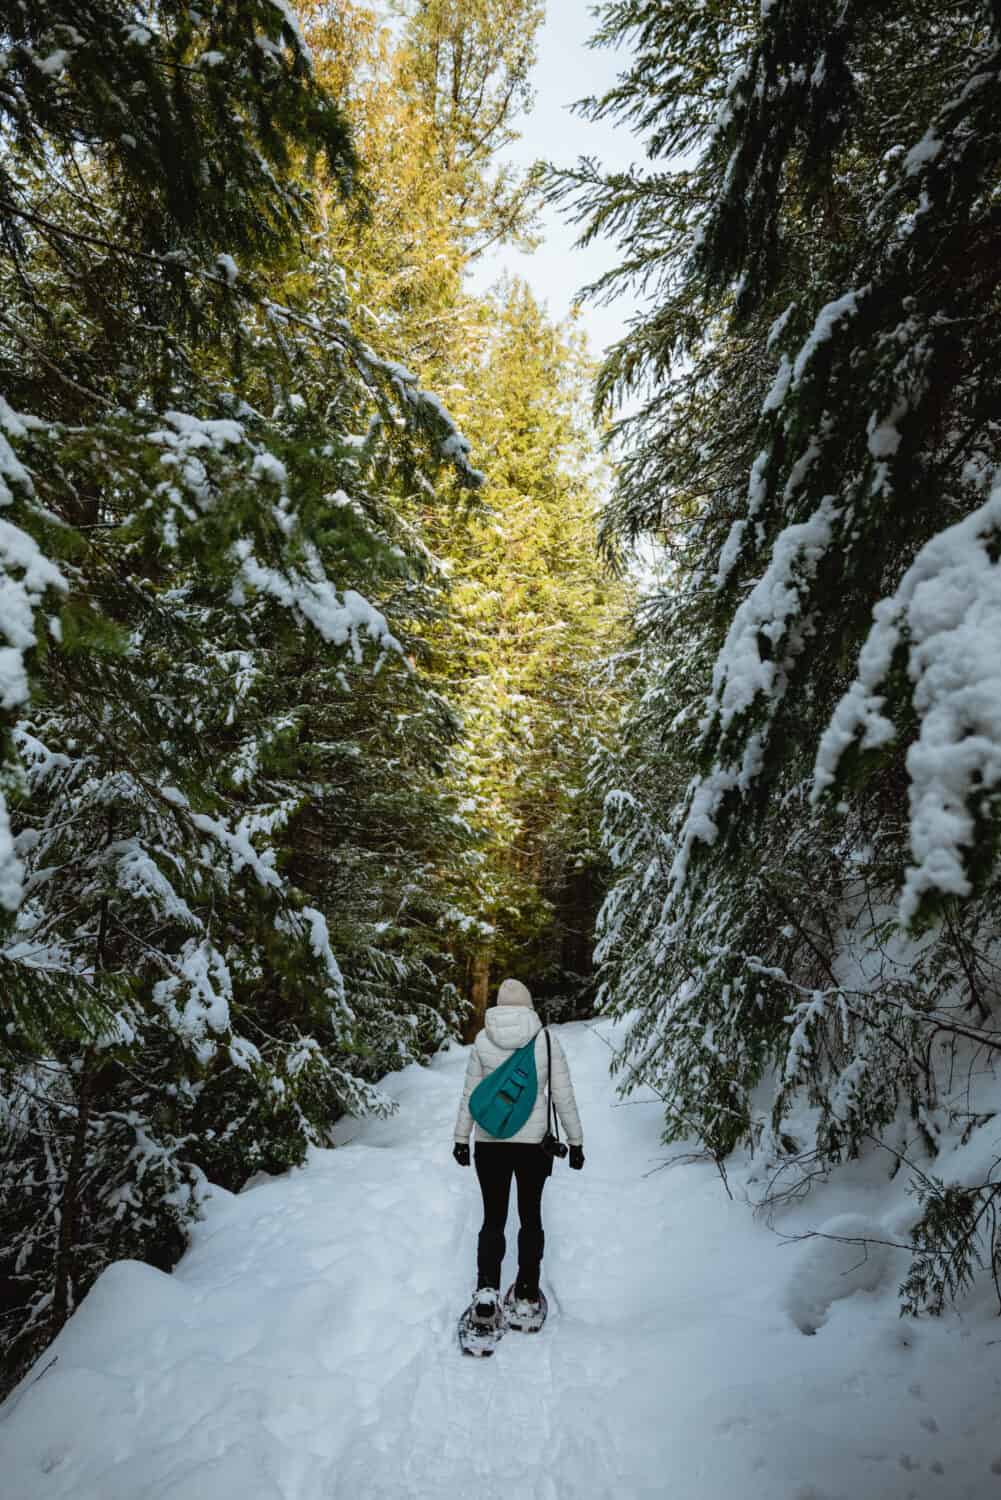 Things To Do In Idaho During Winter - Snowshoeing